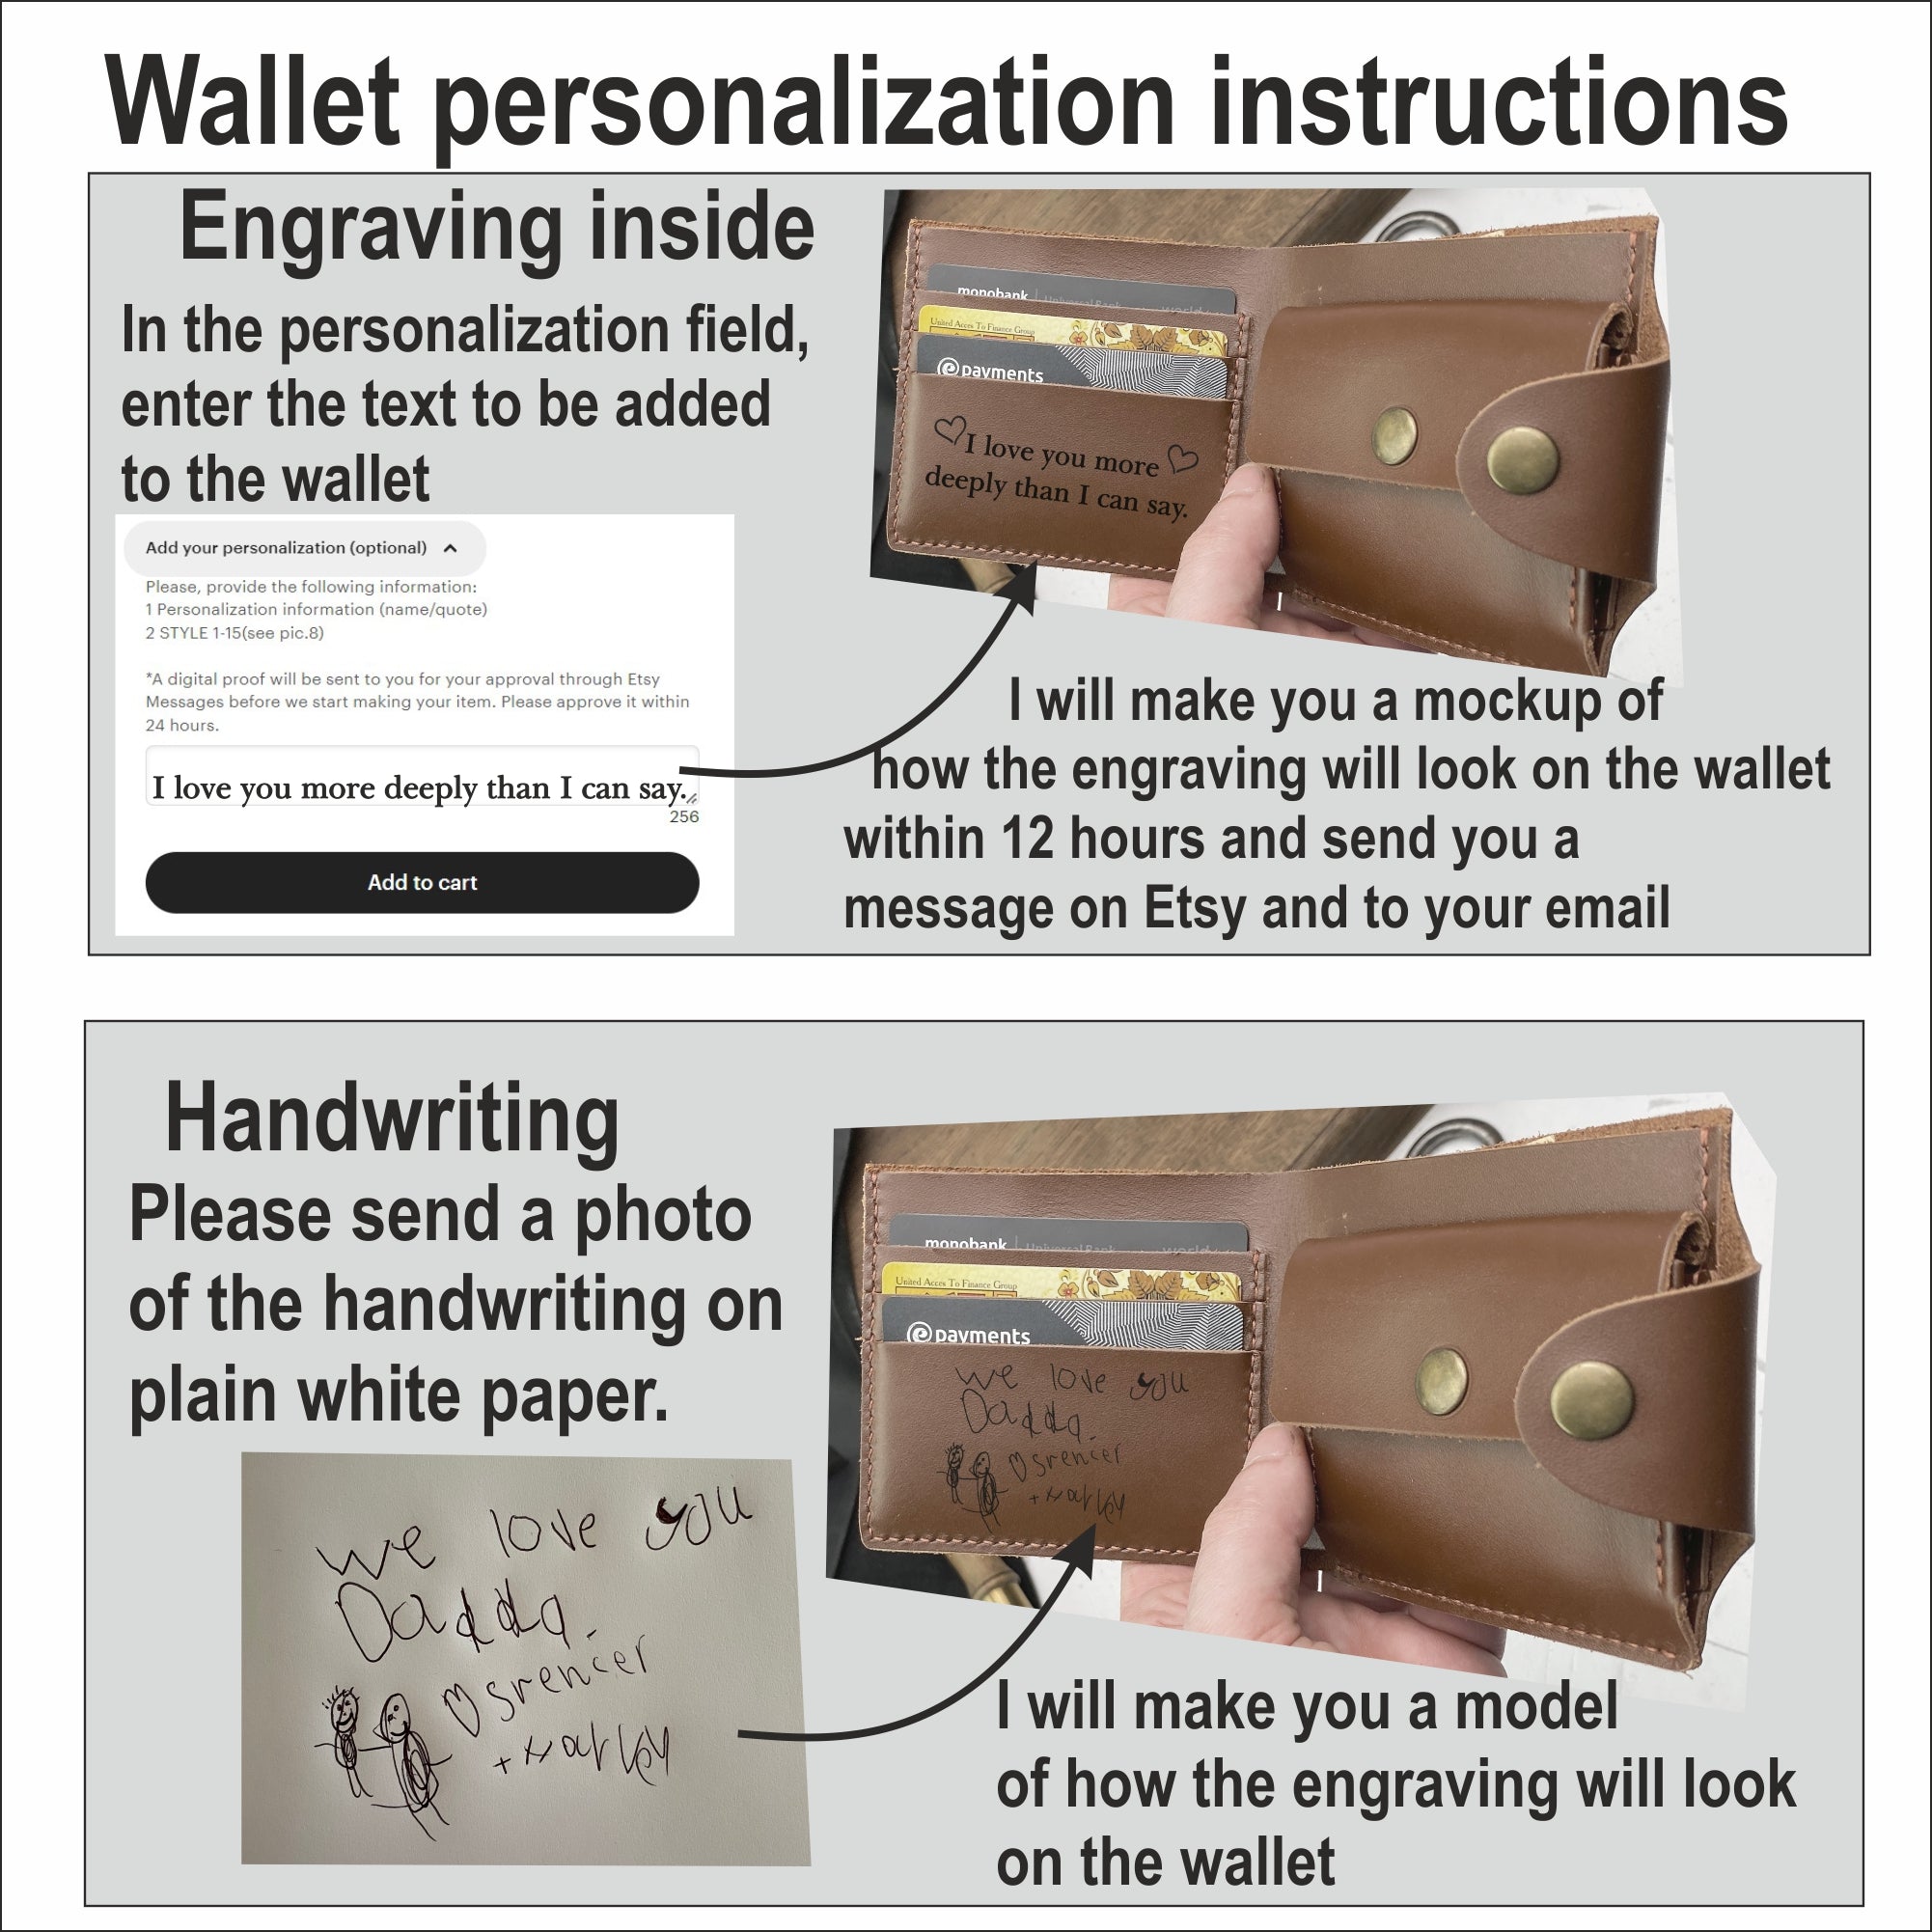 Personalized Leather wallet Inicials Engraved